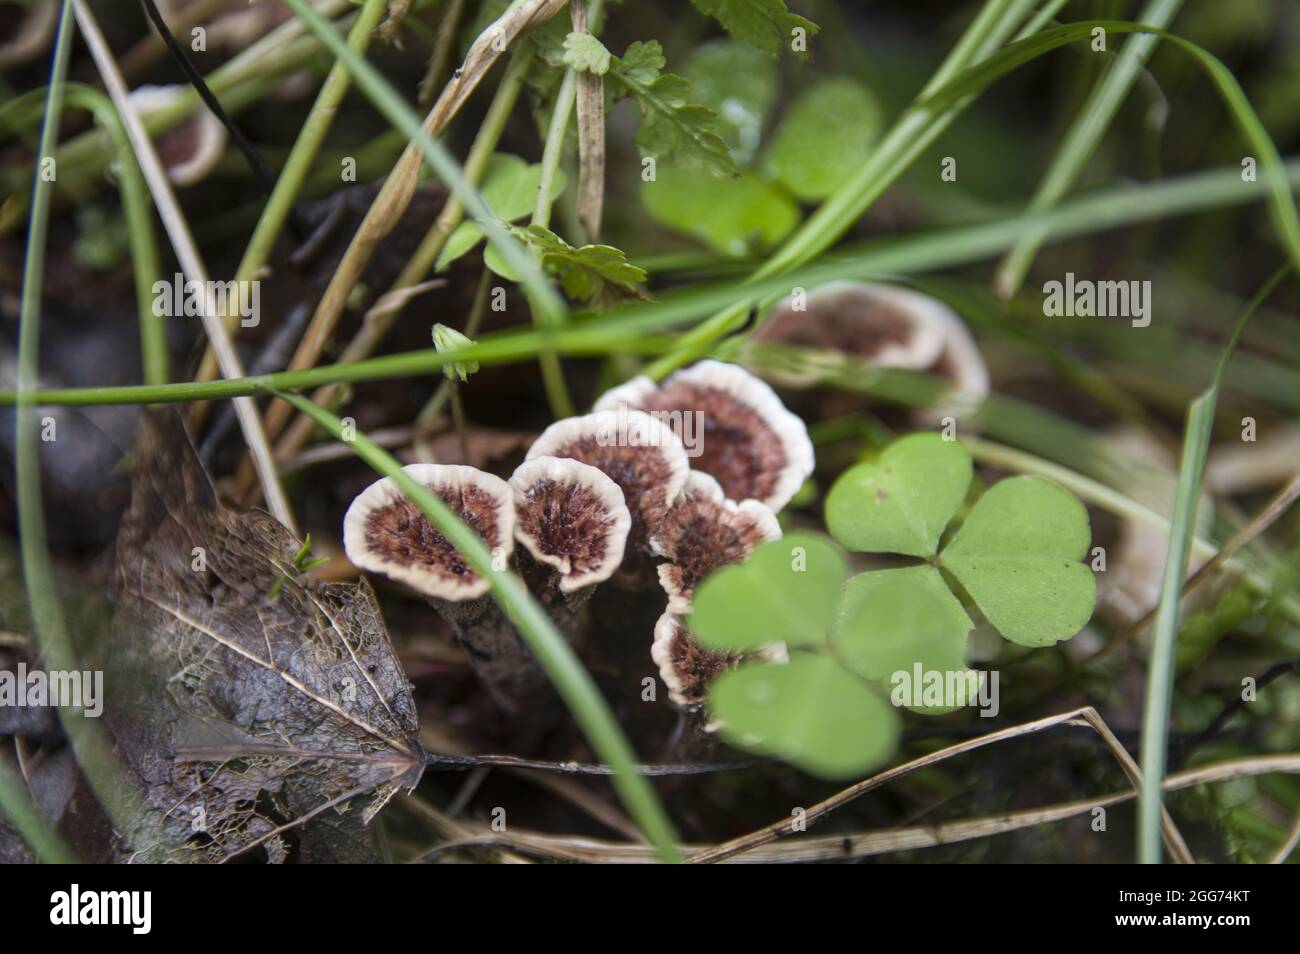 Interesting family of white-brown inedible mushrooms growing in tall grass near clovers and fallen autumn leaves in a dark Latvian forest Stock Photo